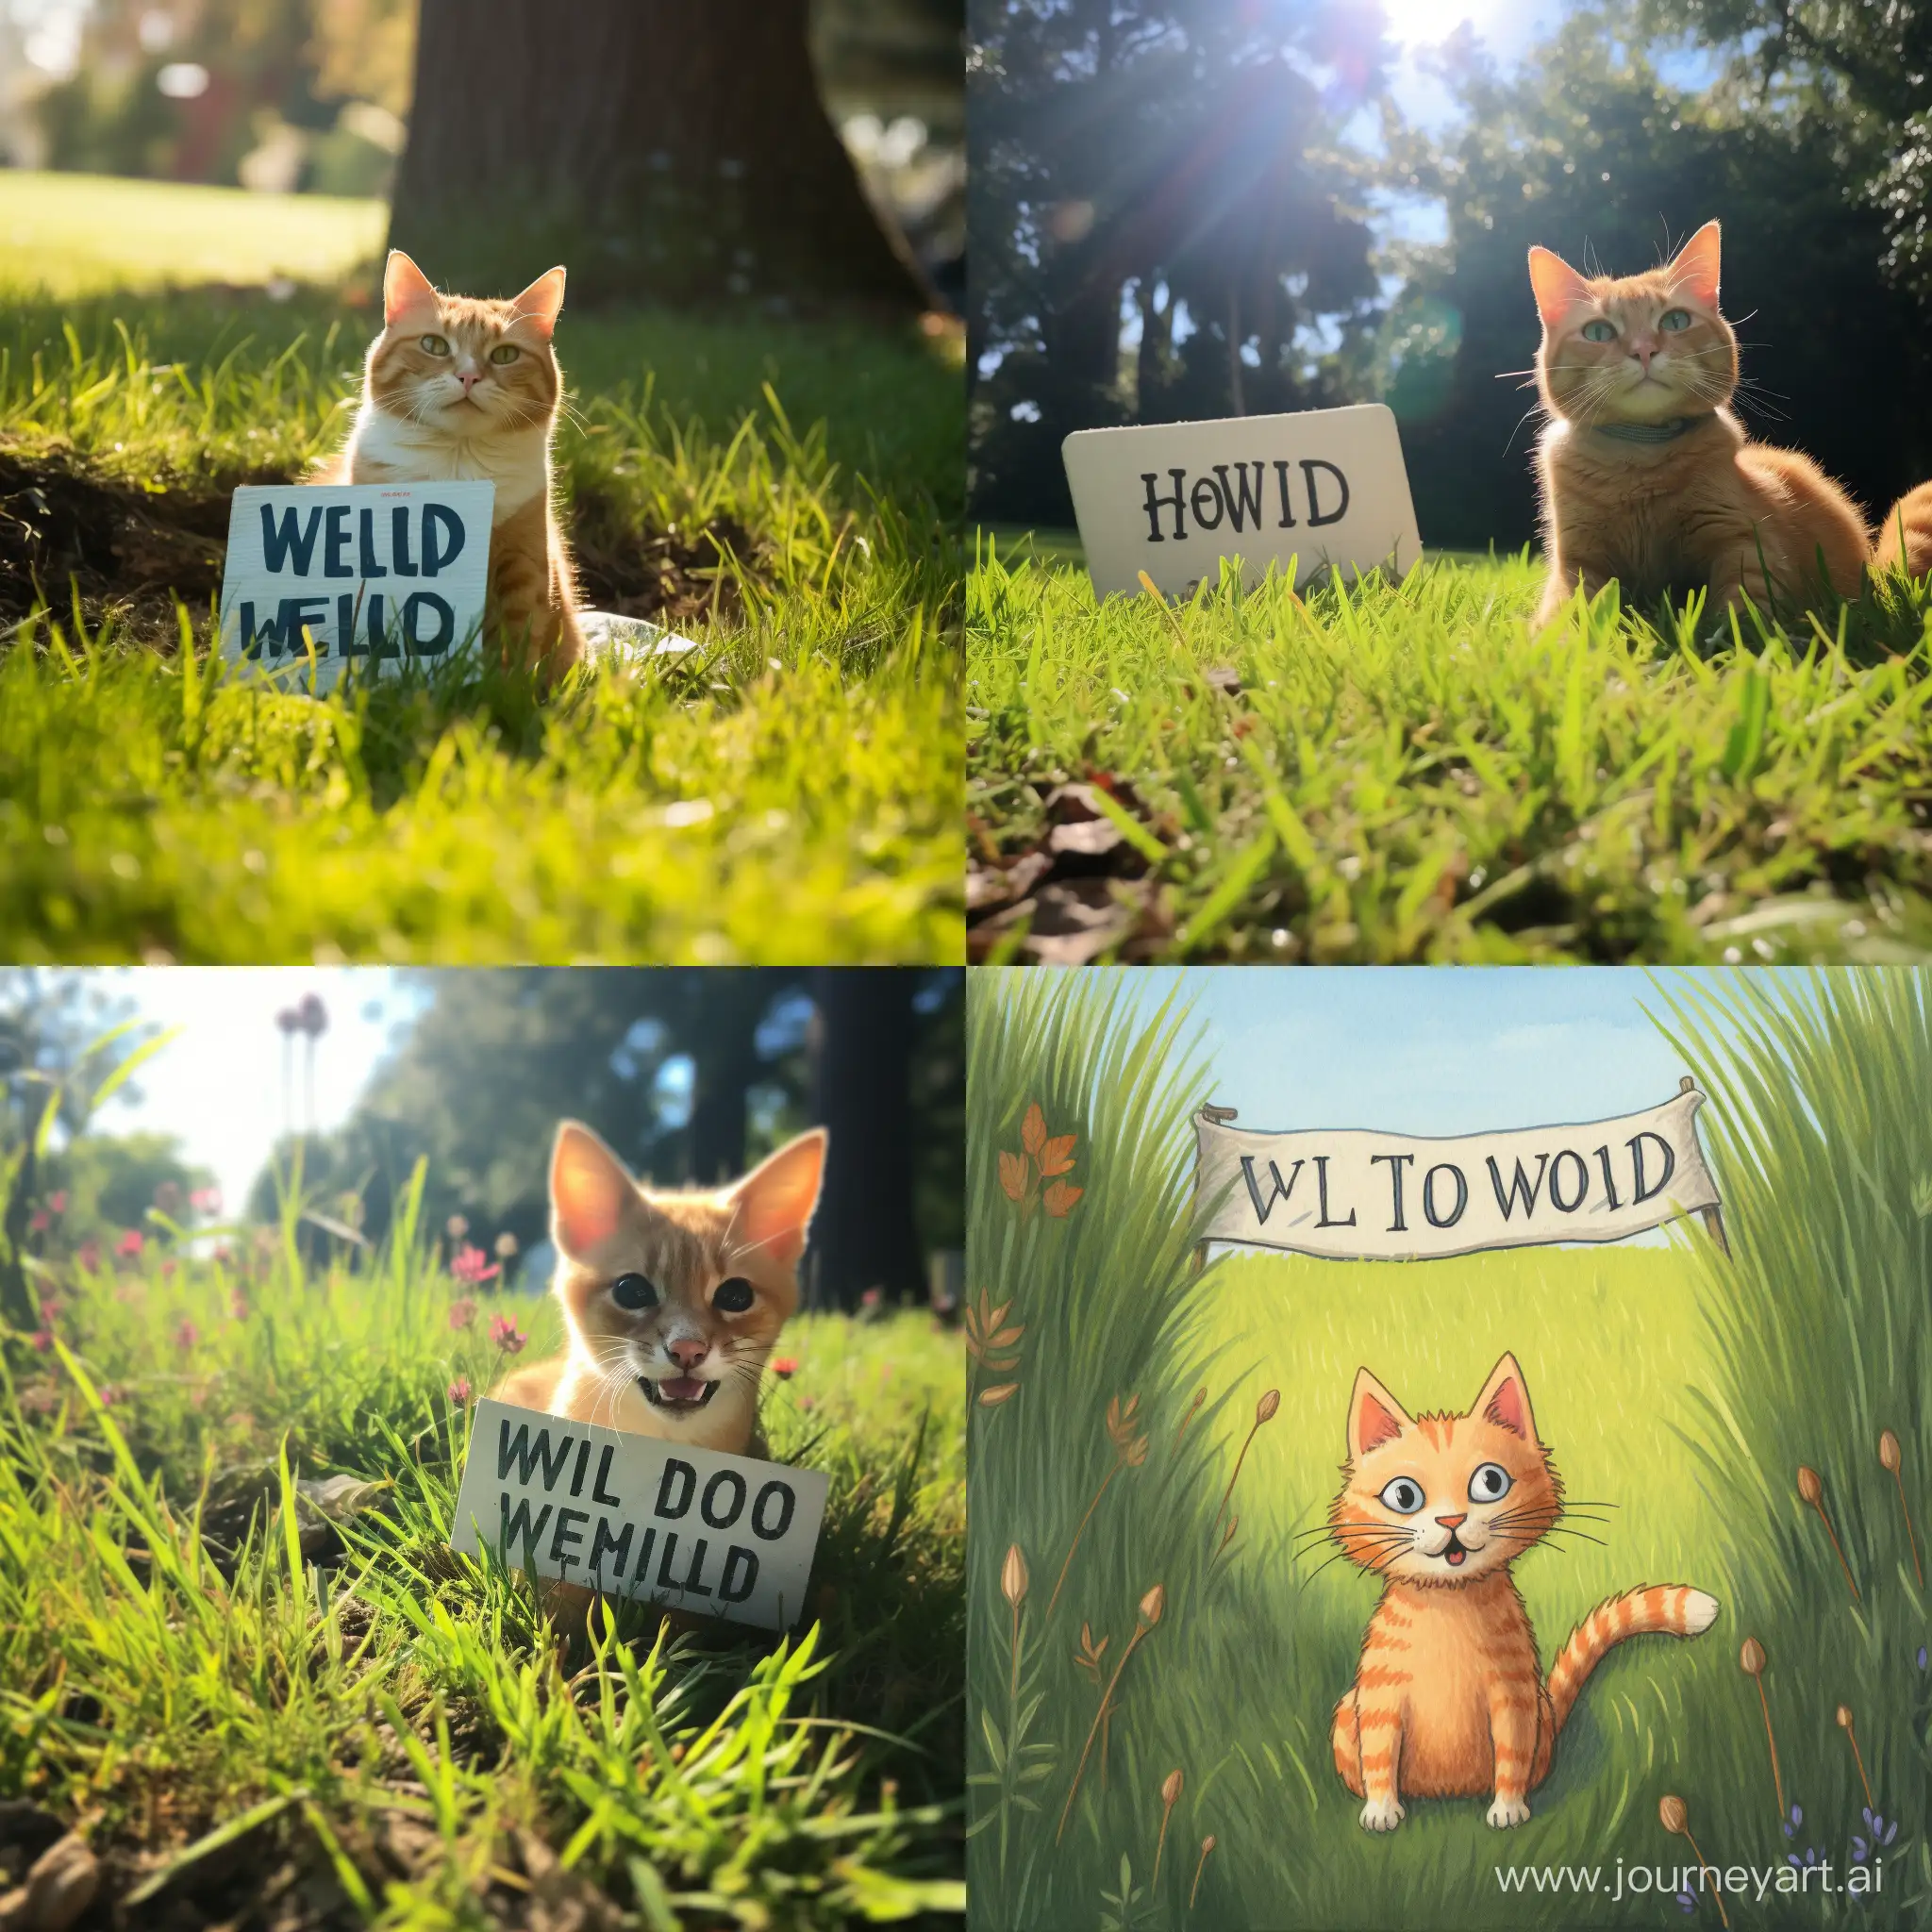 a orange tabby cat sitting on the grass with a sign that says "hello world"